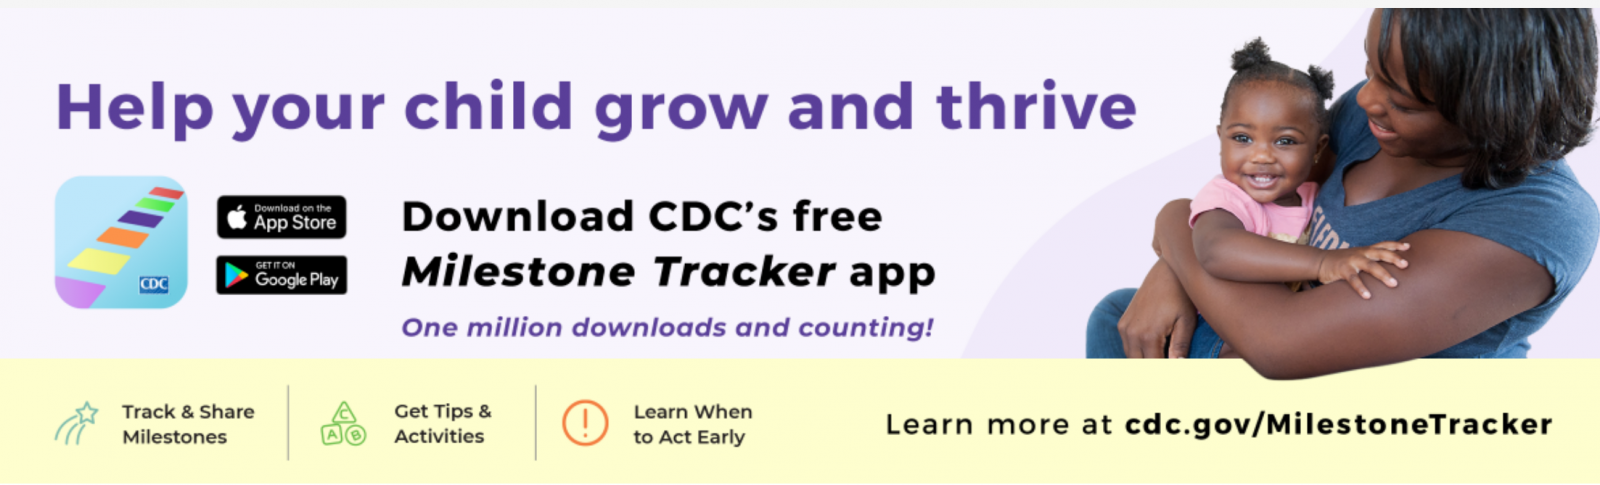 Download the Center for Disease Control's free Milestone Tracker App